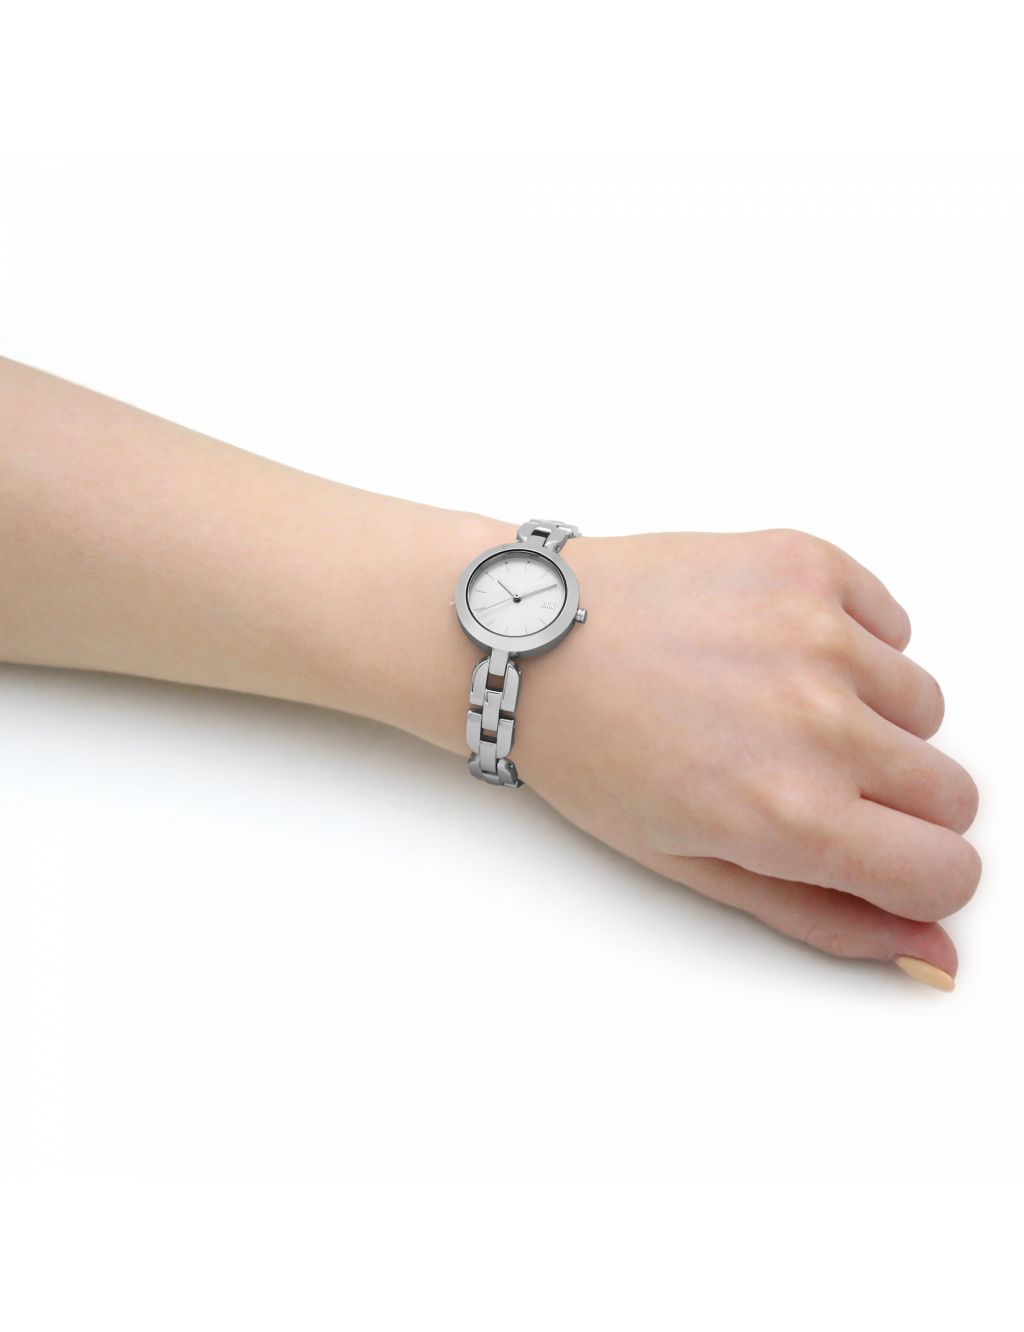 DKNY City Link Silver Watch image 6